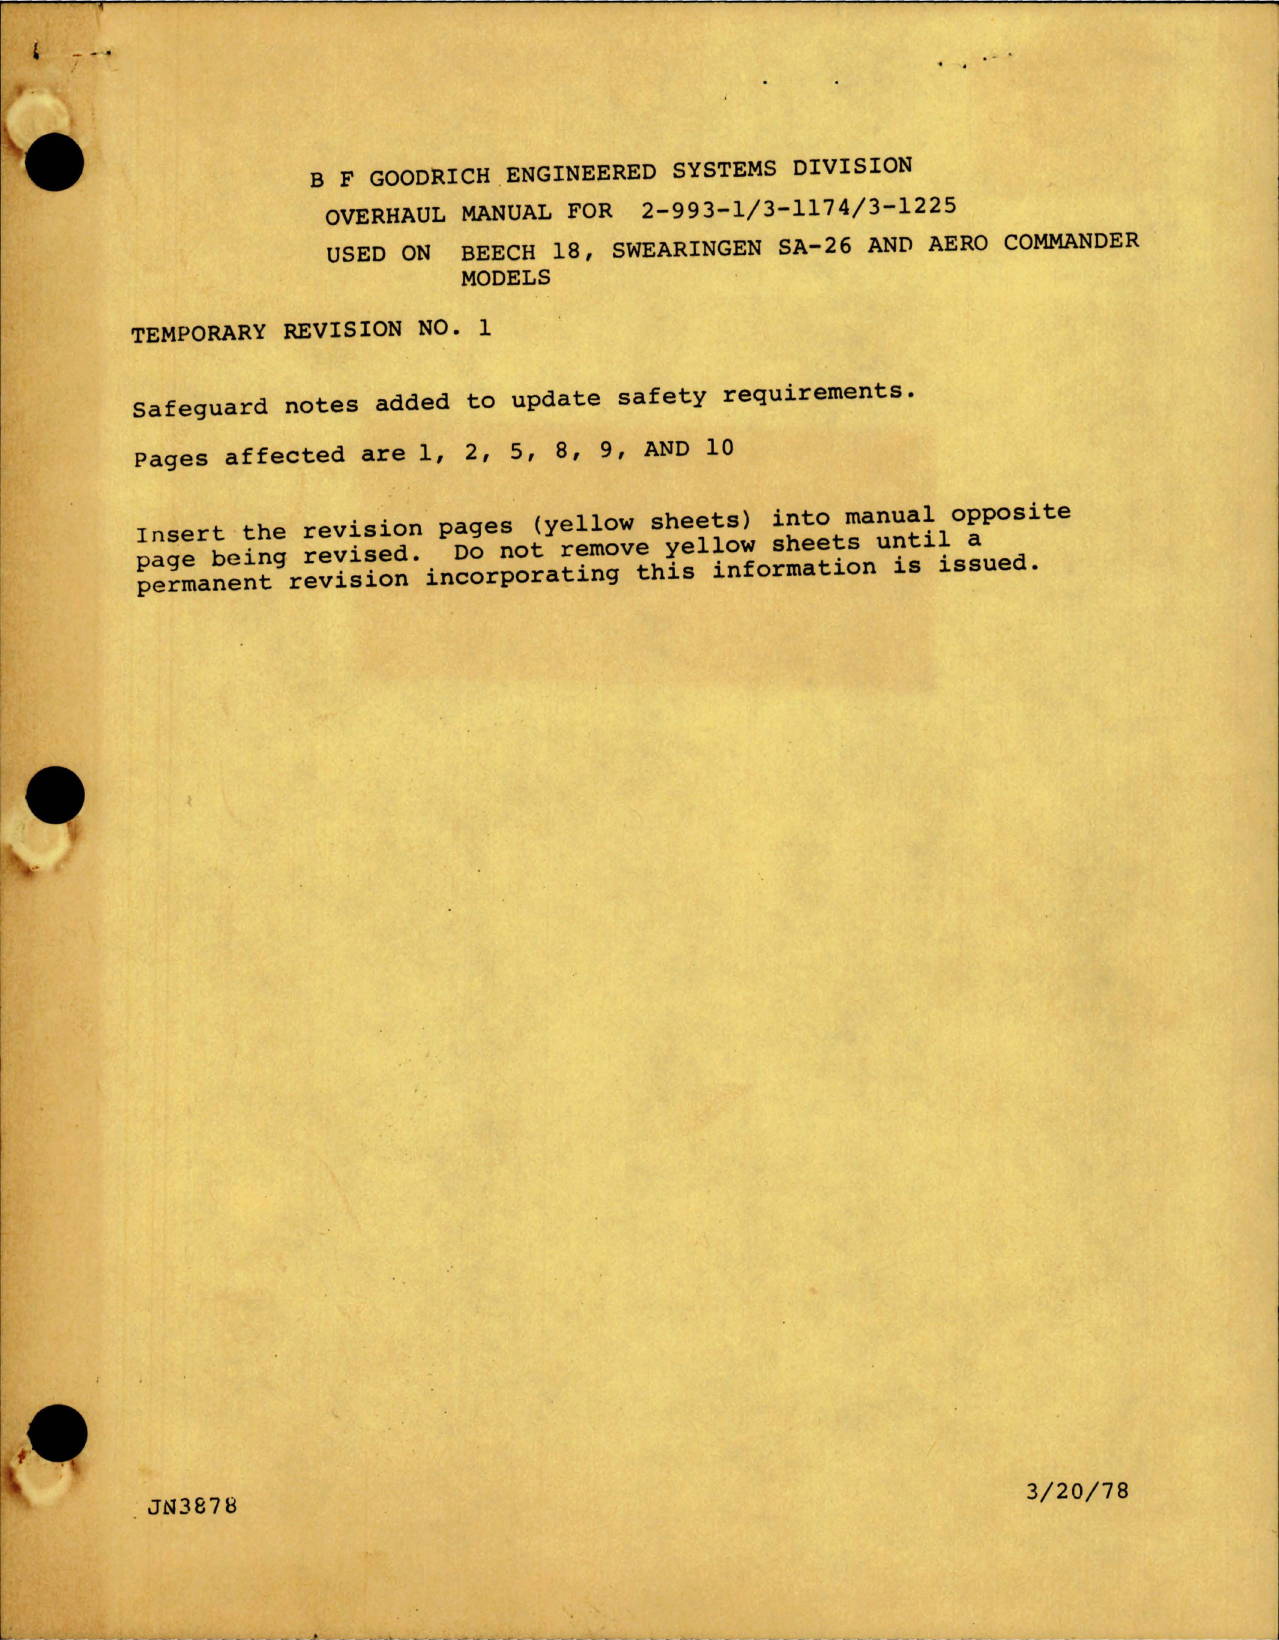 Sample page 1 from AirCorps Library document: Installation, Maintenance and Overhaul for Multiple Disk Brake 2-993-1 and Main Landing Gear 3-1174 and 3-1225